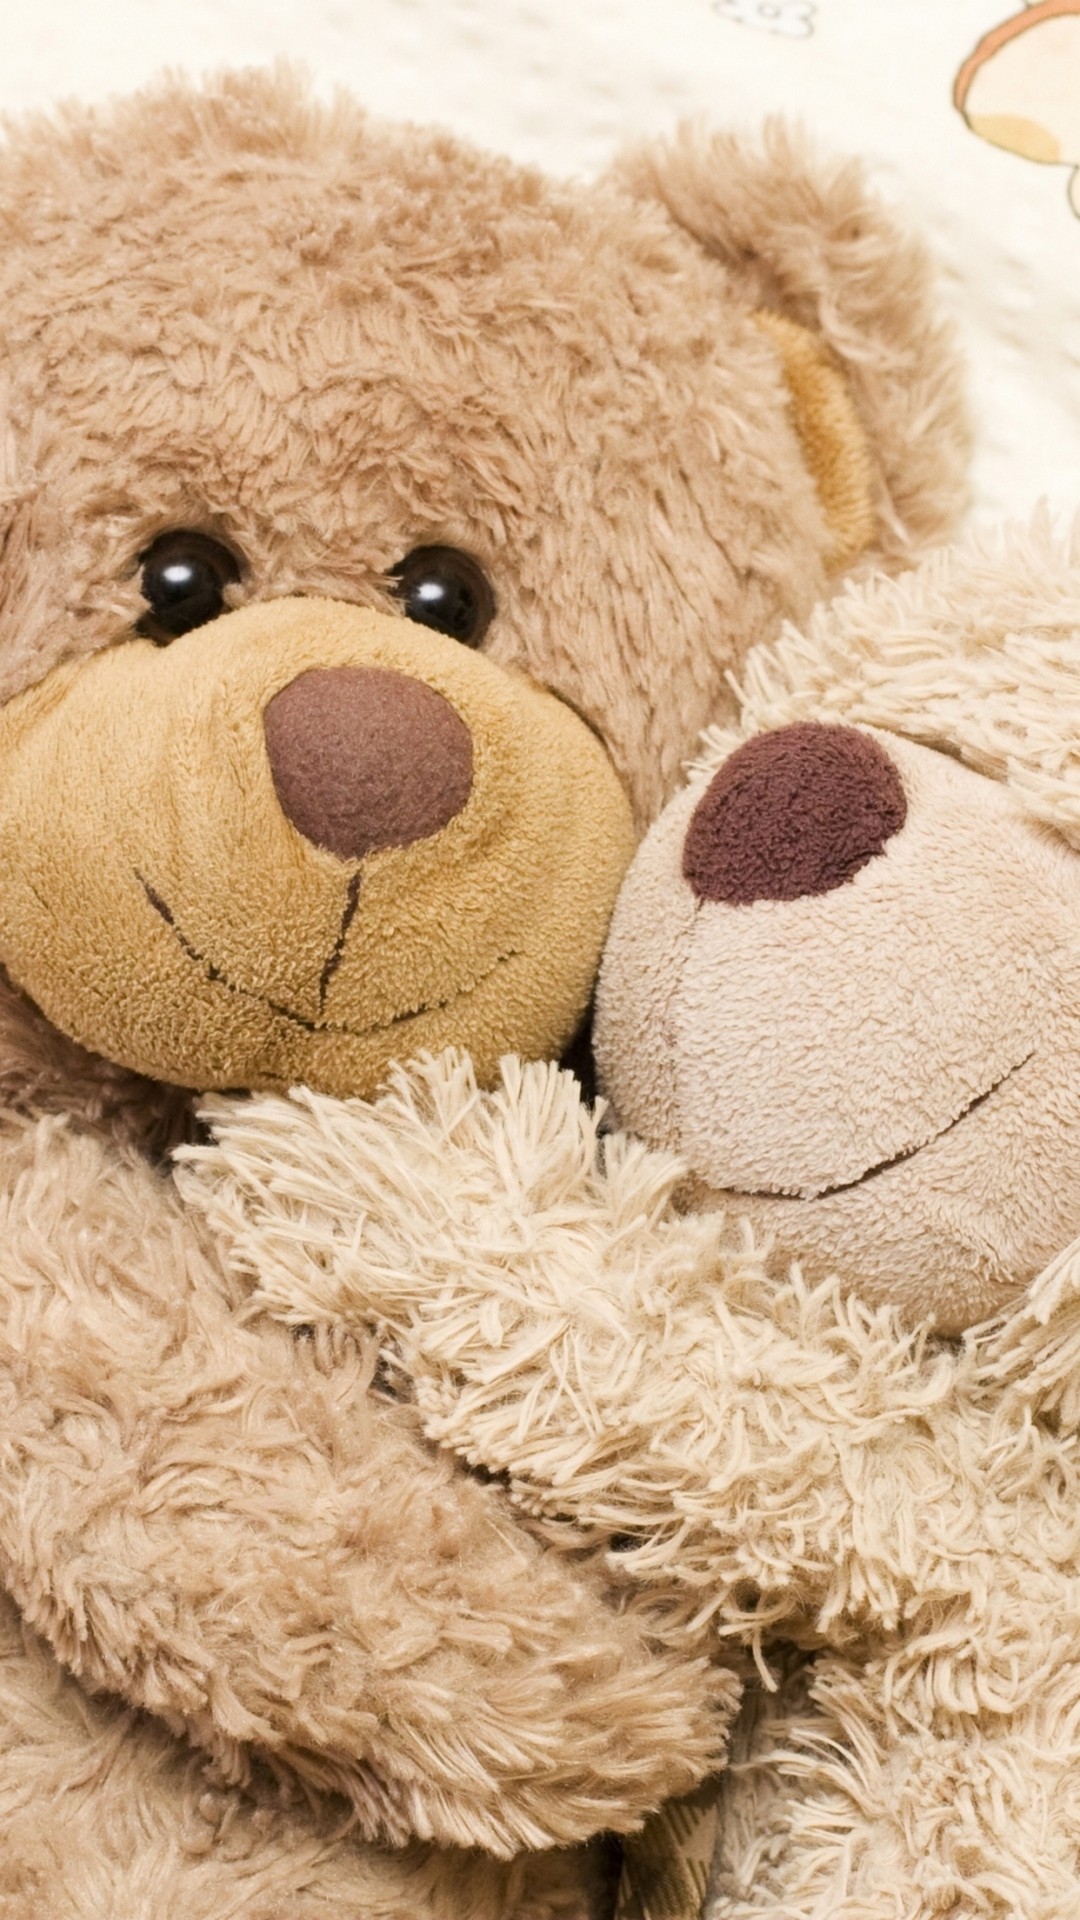 Cute Teddy Bear iPhone X Wallpaper with resolution 1080X1920 pixel. You can use this wallpaper as background for your desktop Computer Screensavers, Android or iPhone smartphones